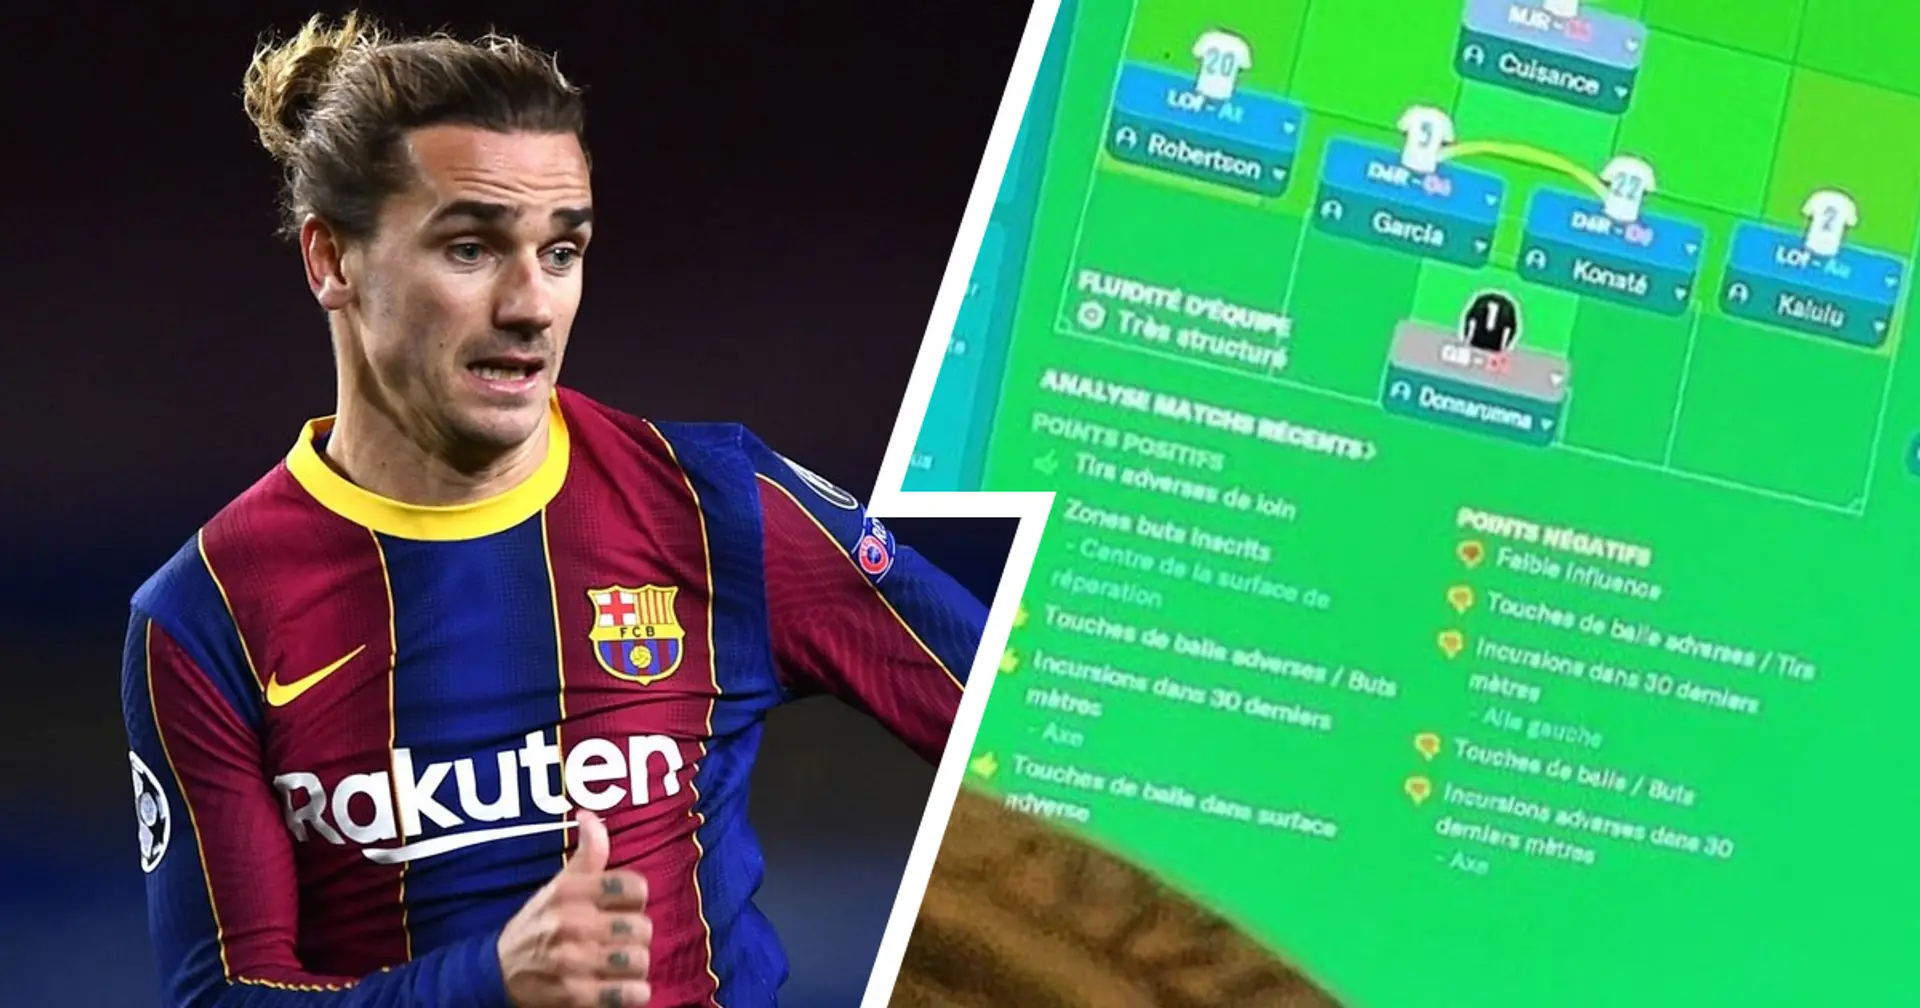 A fan of young talents: what Griezmann's team on Football Manager looks like